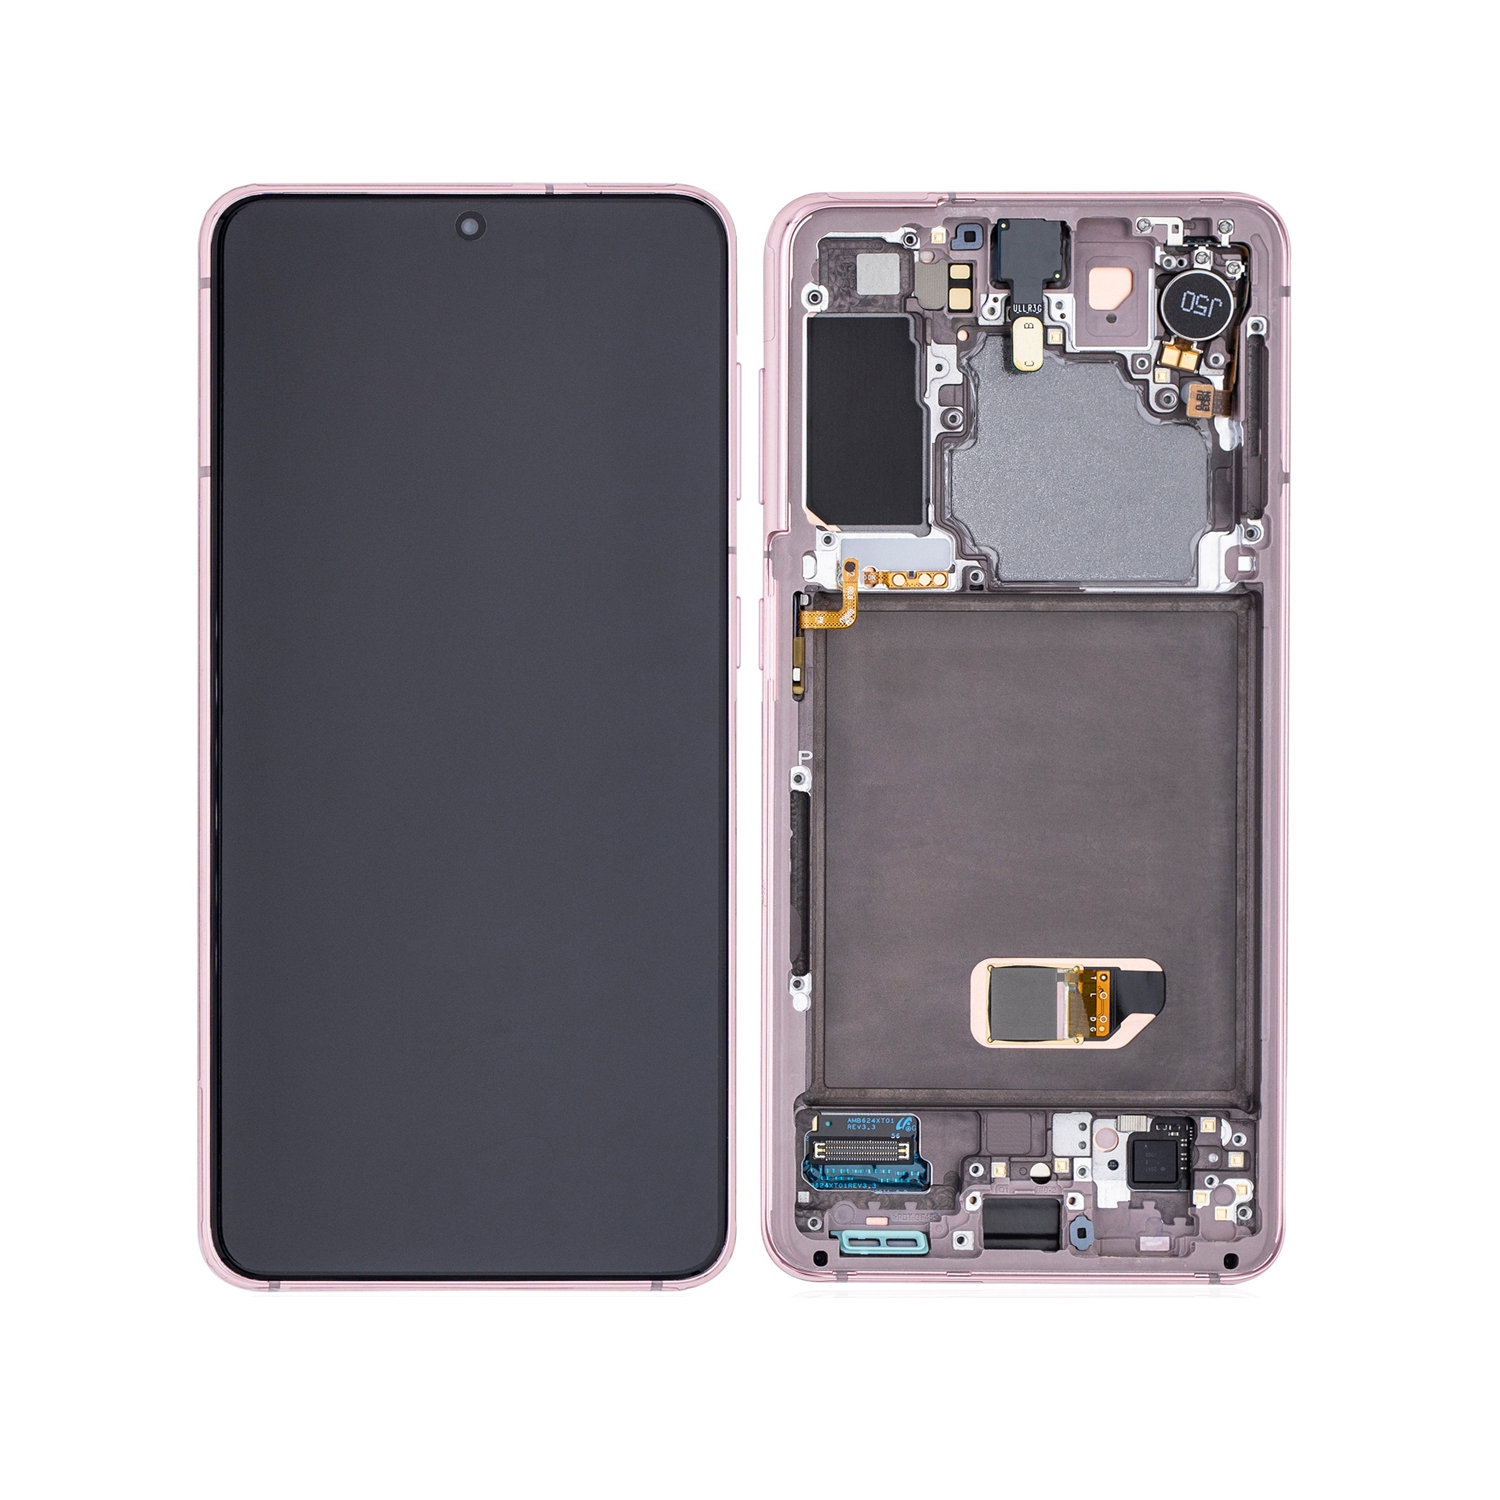 LCD Display Touch Screen Digitizer Assembly + Frame For Samsung Galaxy S21 5G (SM-G991W) - Phantom Violet (Refurbished)